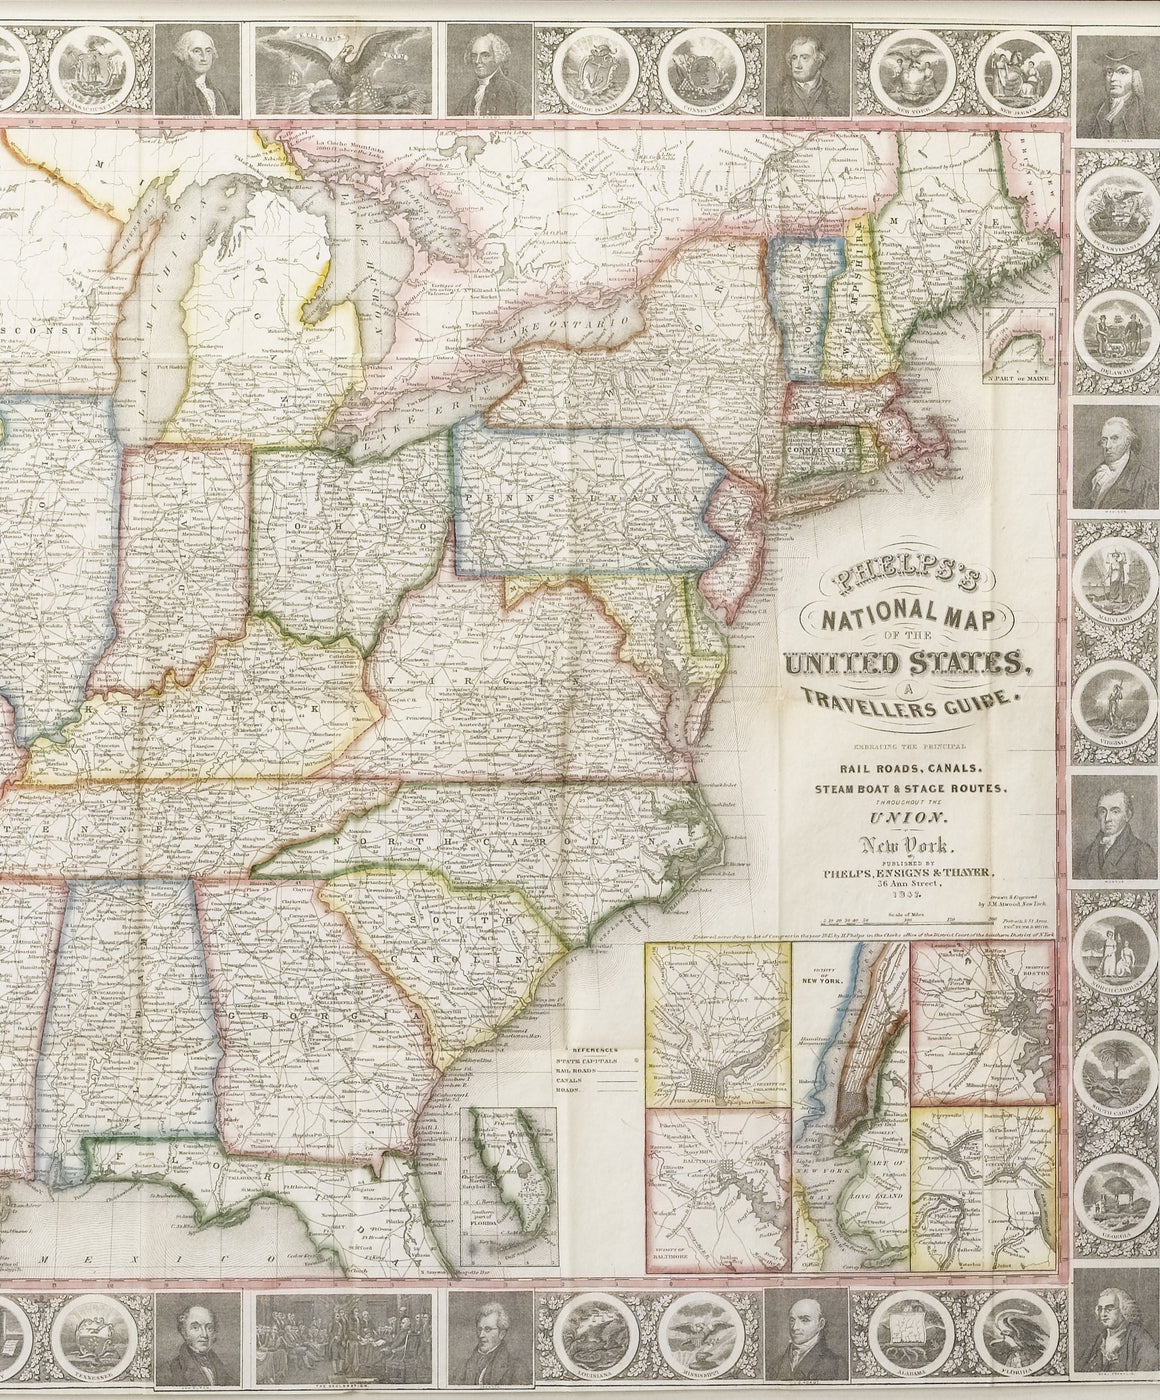 1847 Phelps's National Map of the United States